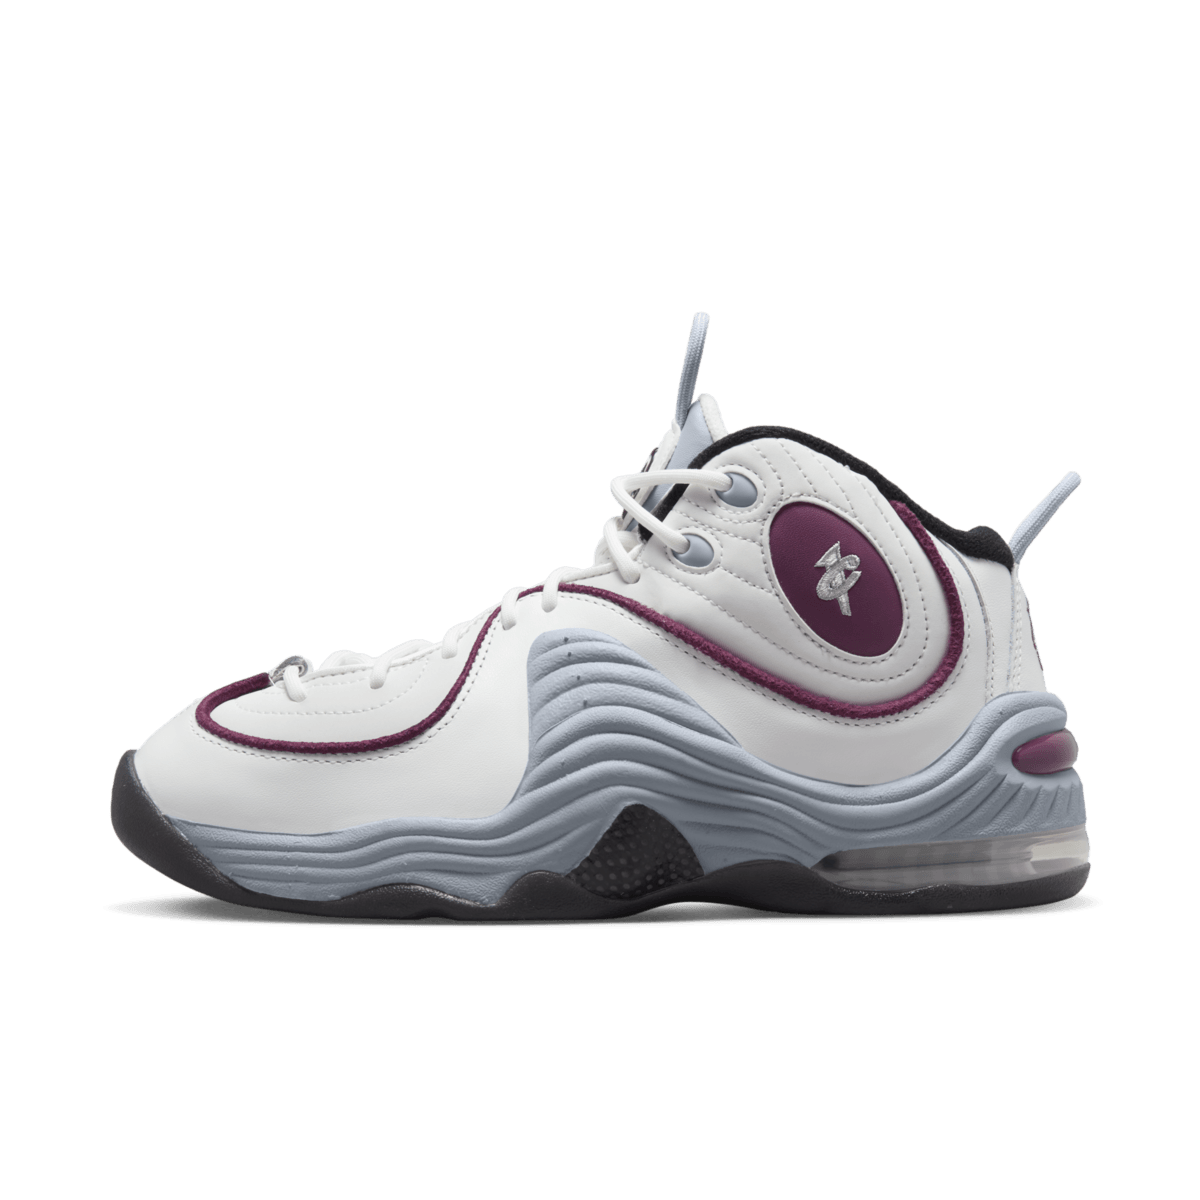 Nike Air Penny 2 WMNS 'Rosewood' DV1163-100